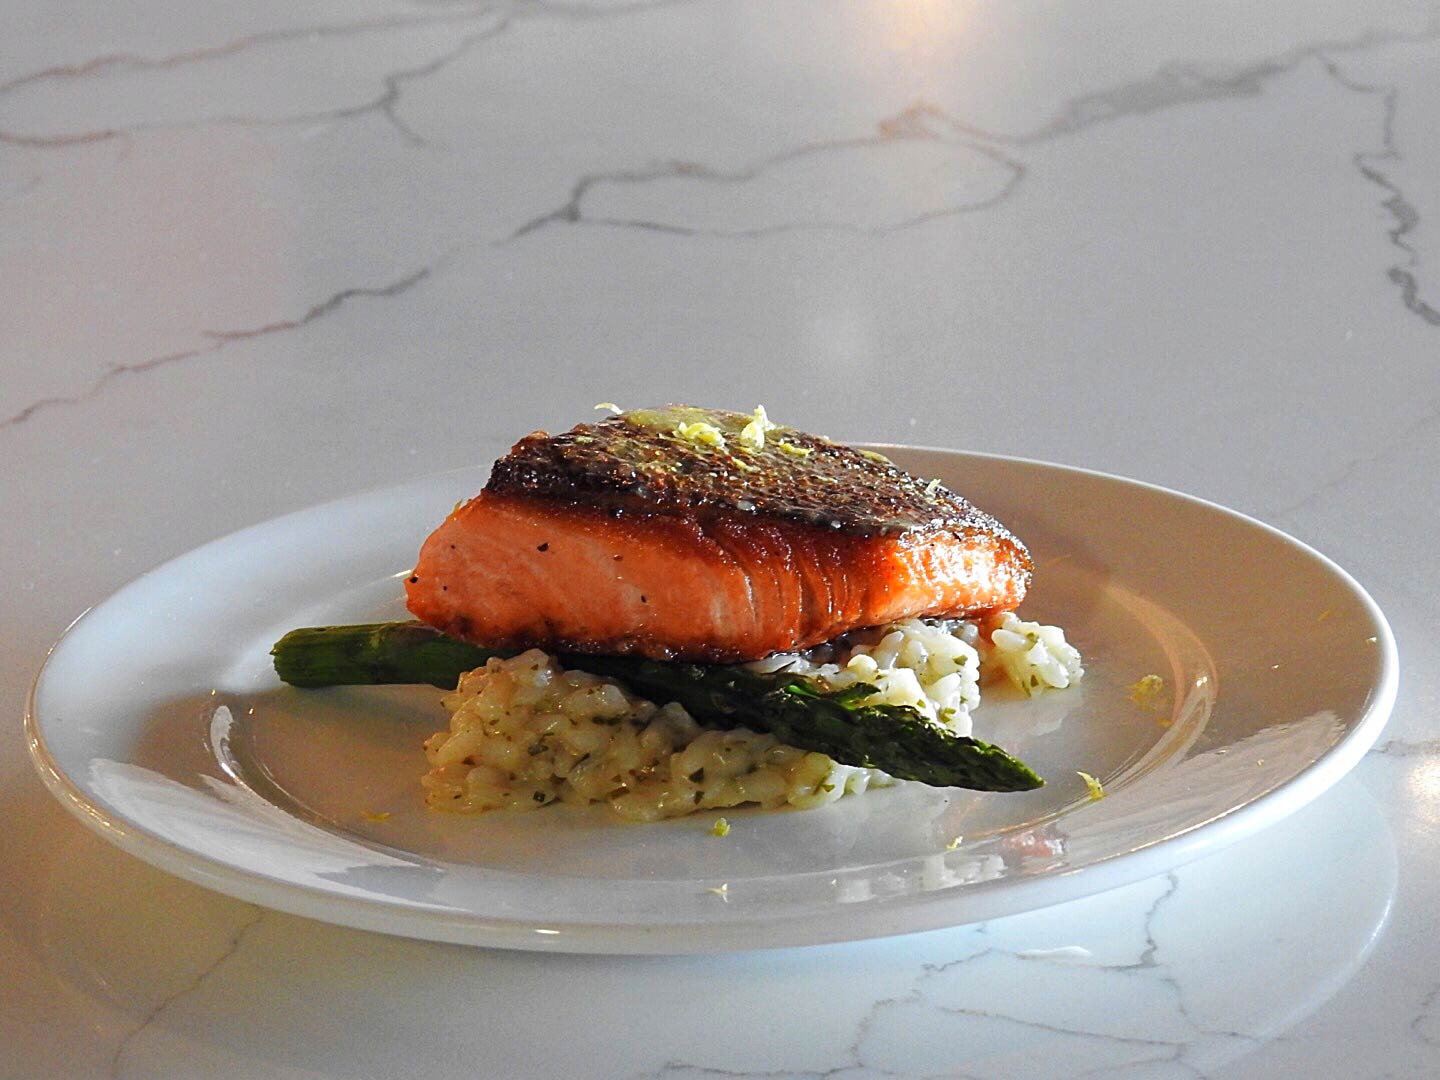 Sample-size portion of the salmon and risotto.